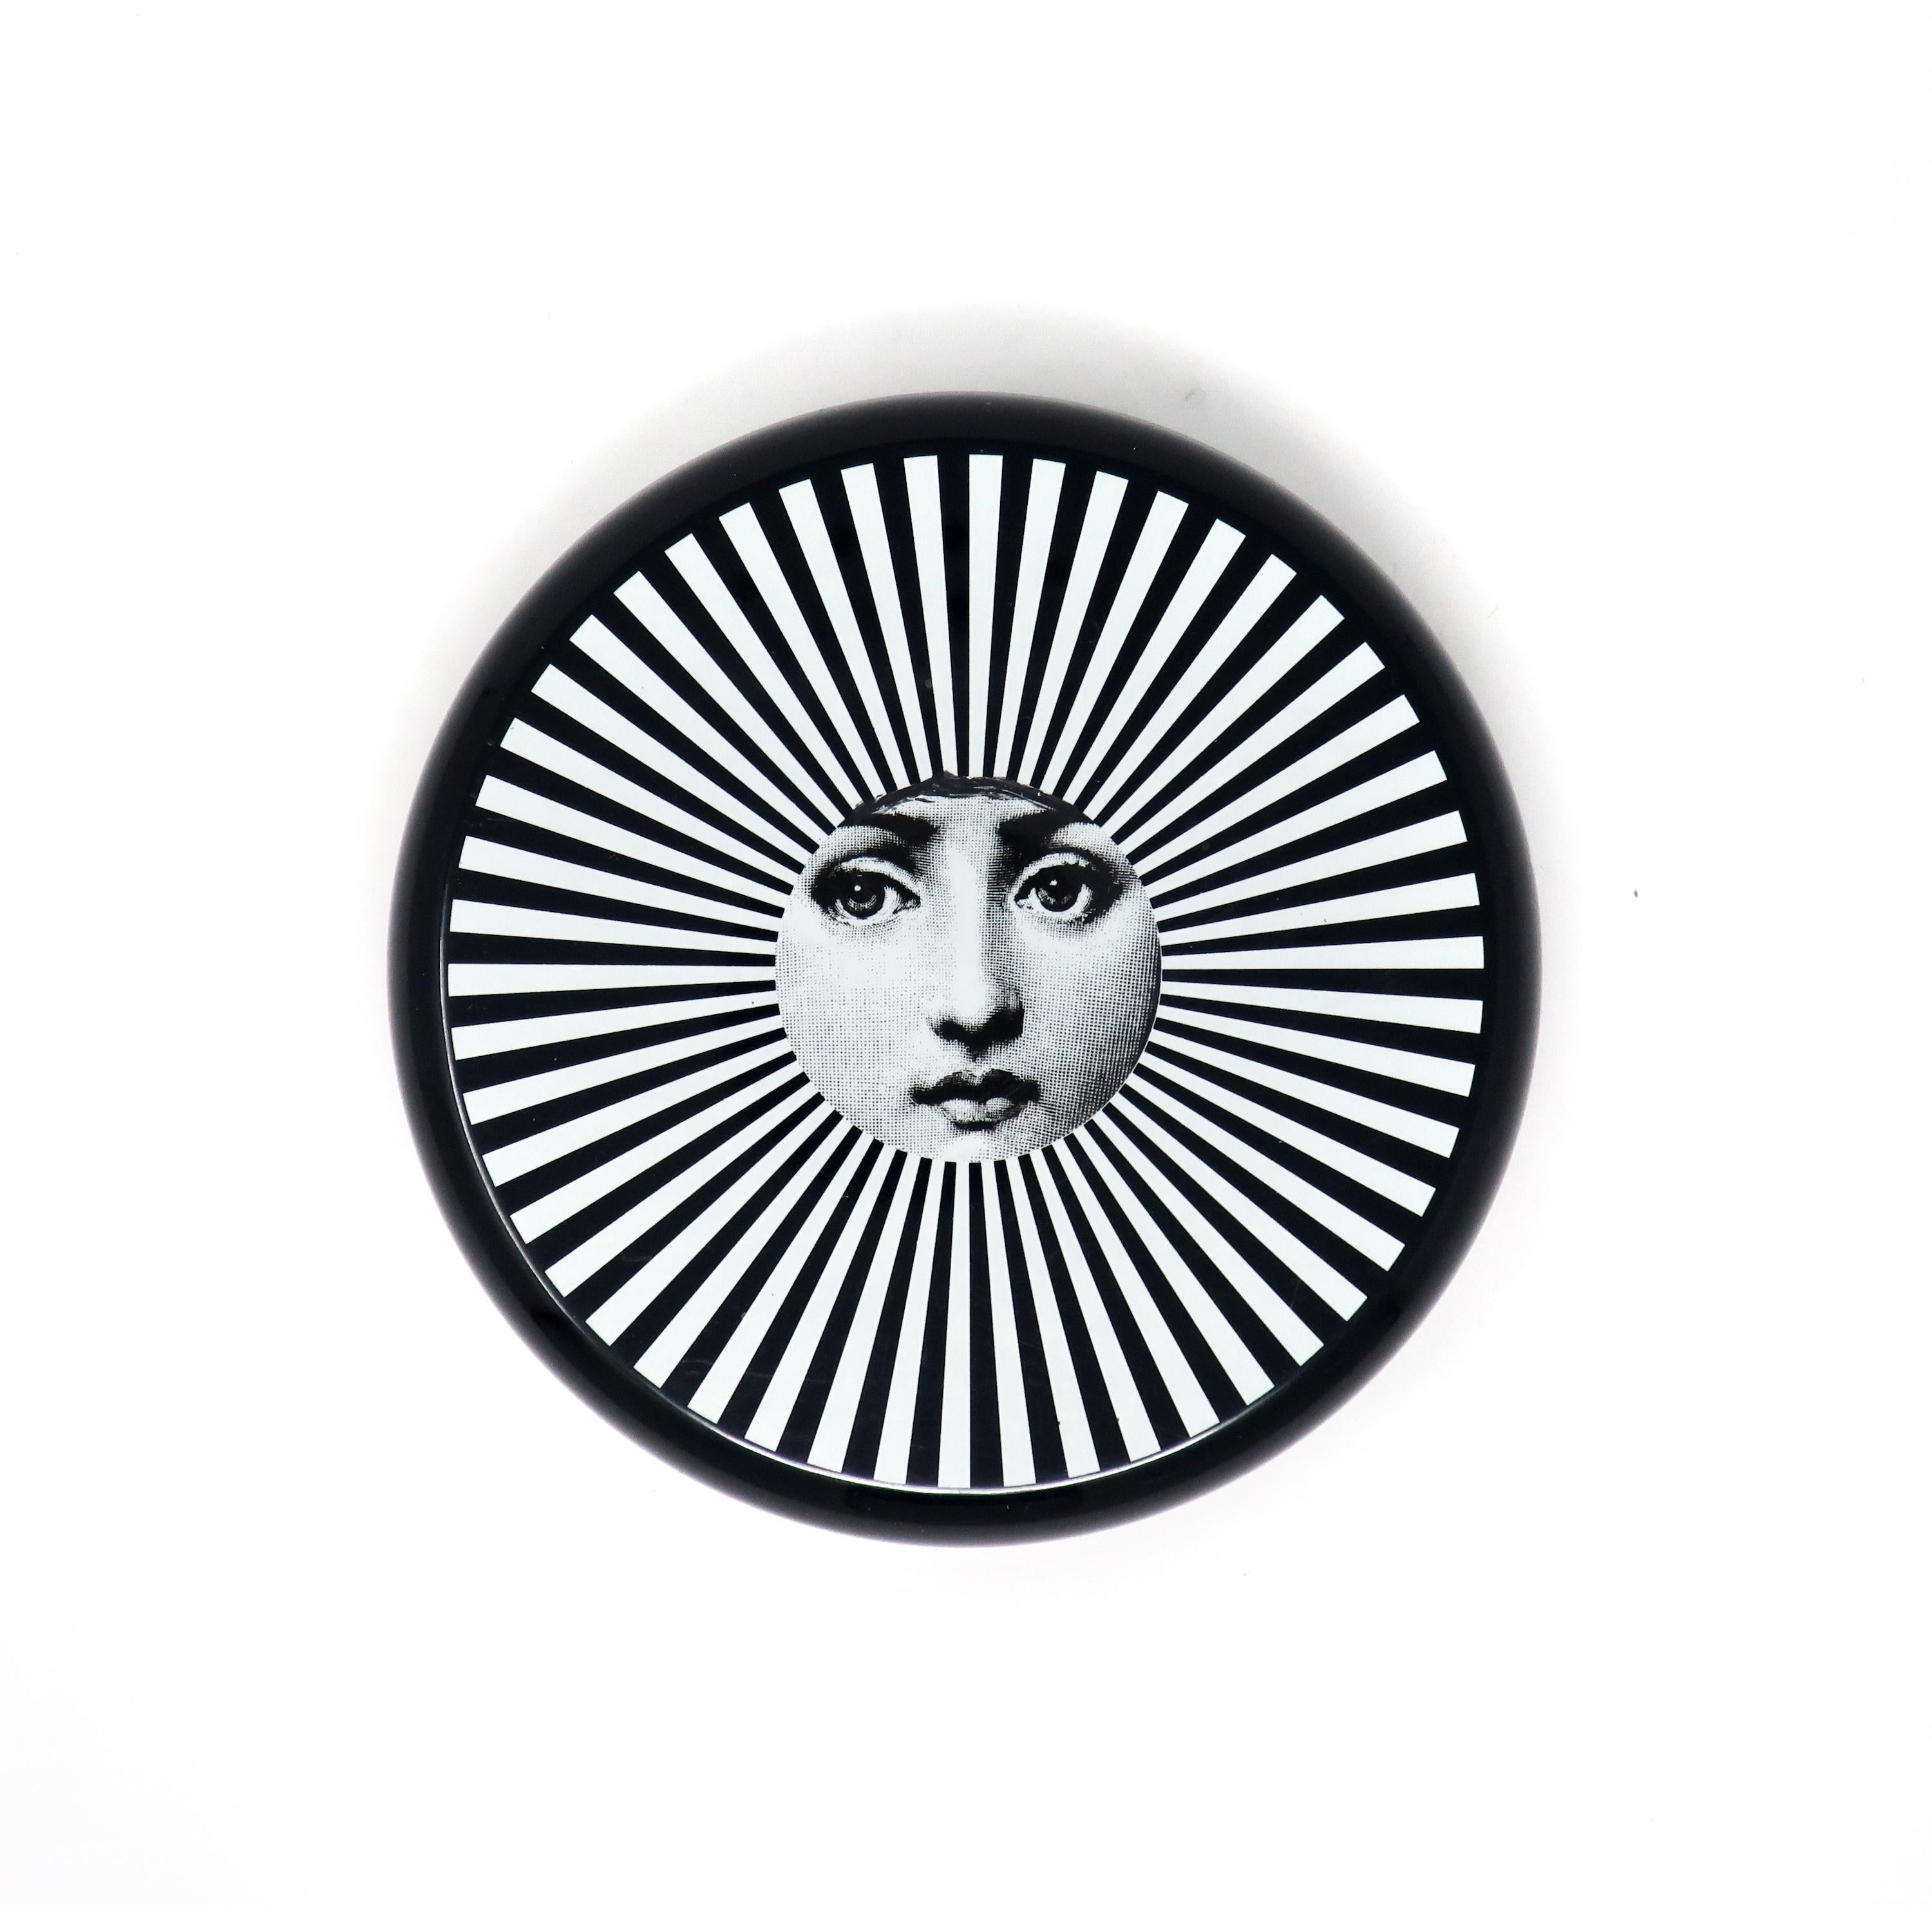 Beautifully crafted and lacquered, and lined in padded velvet, this round trinket box by Fornasetti will add a great decorative touch to your home. Features a whimsical sun design in black and white with a woman’s face in the center. Perfect for